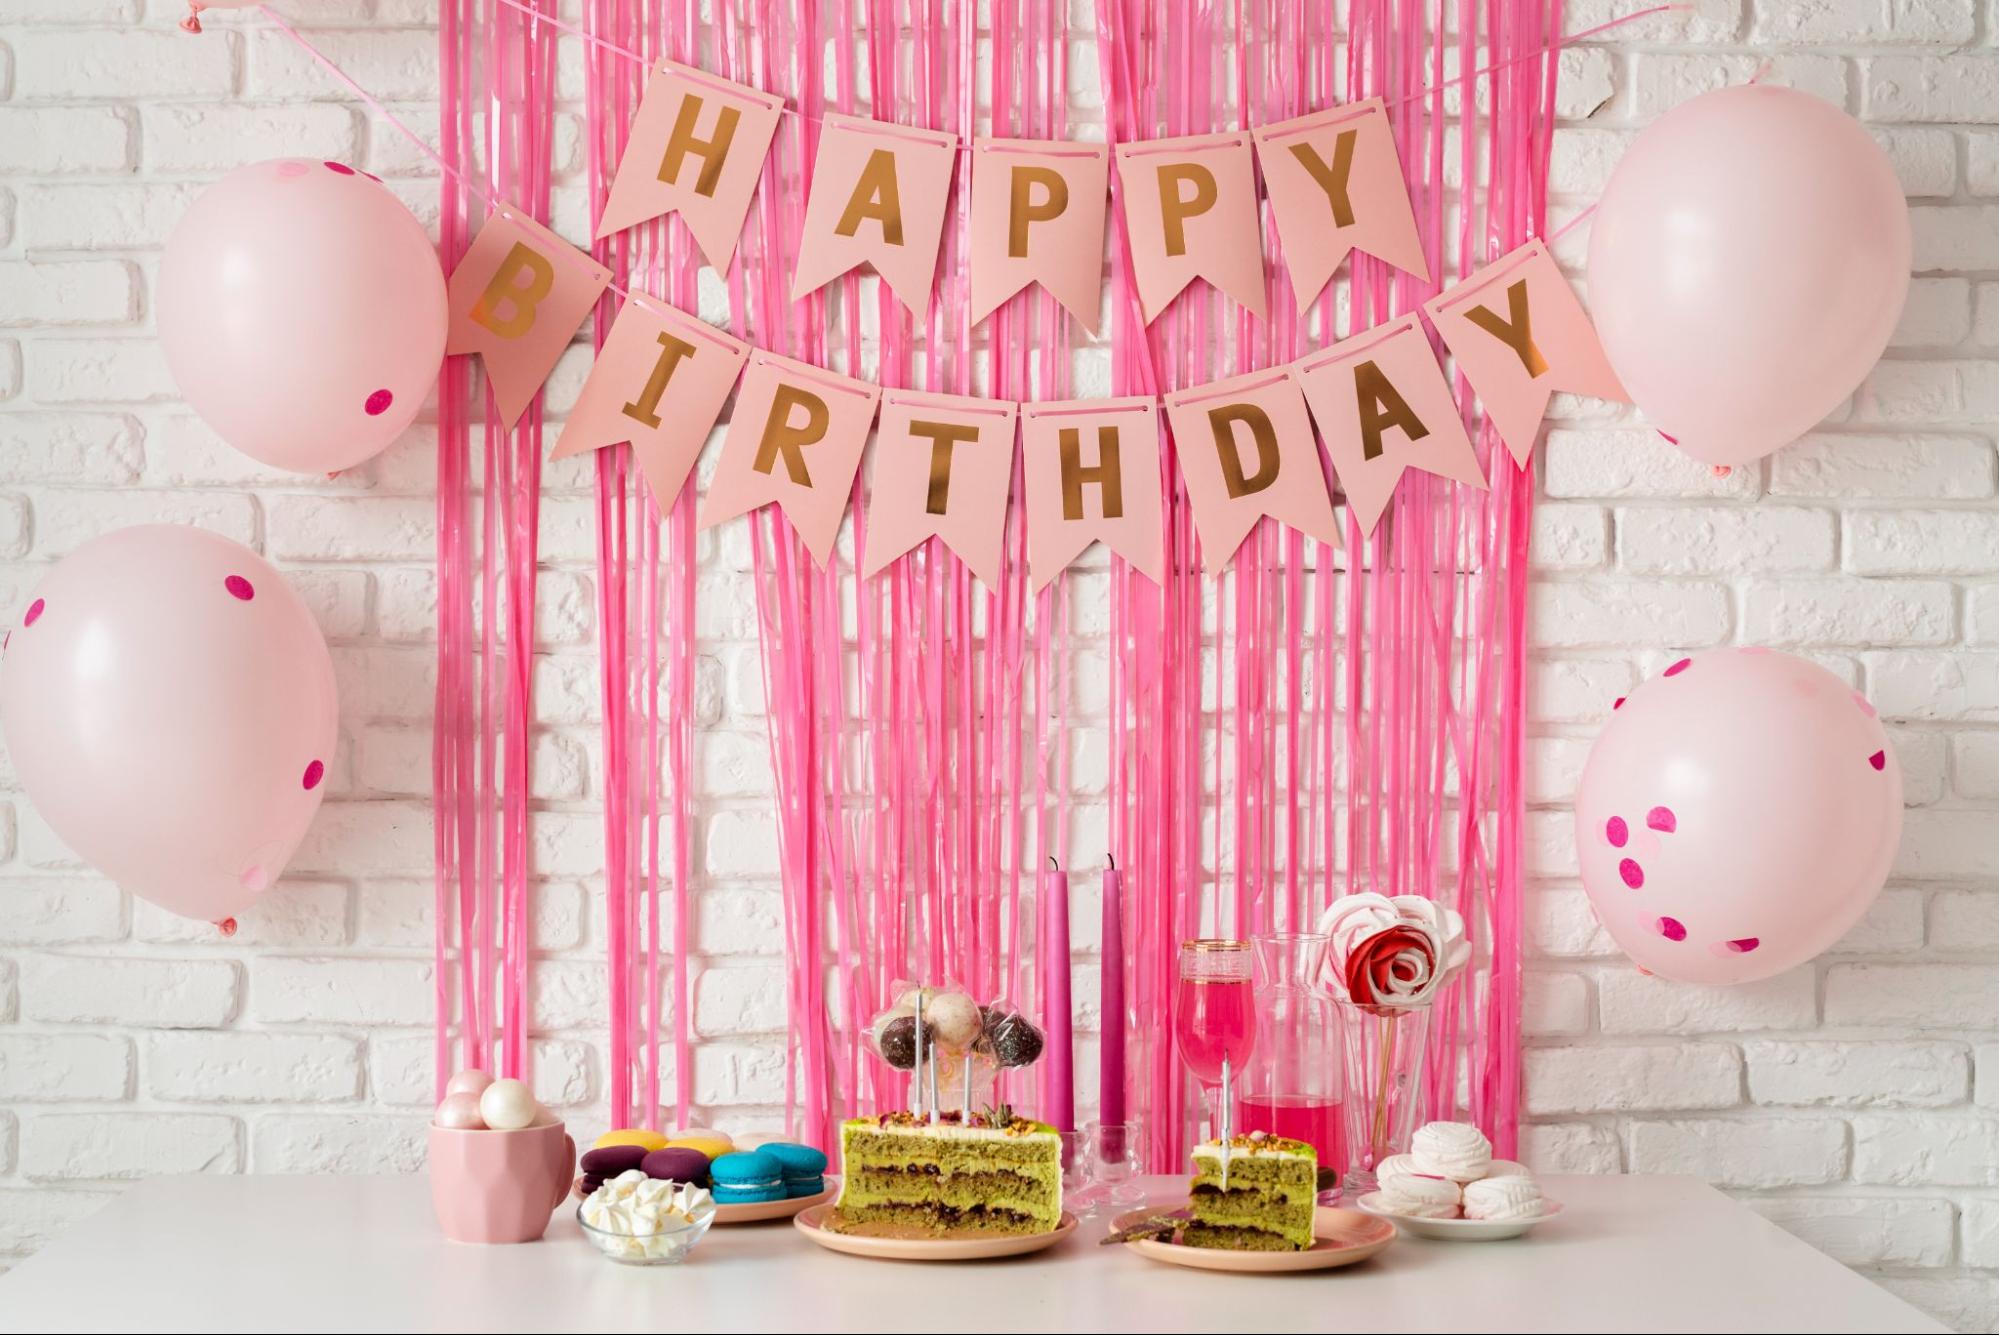 Personalized Banners and Signs: Birthday Decor Unforgettable ideas for a happy celebration in the UAE.